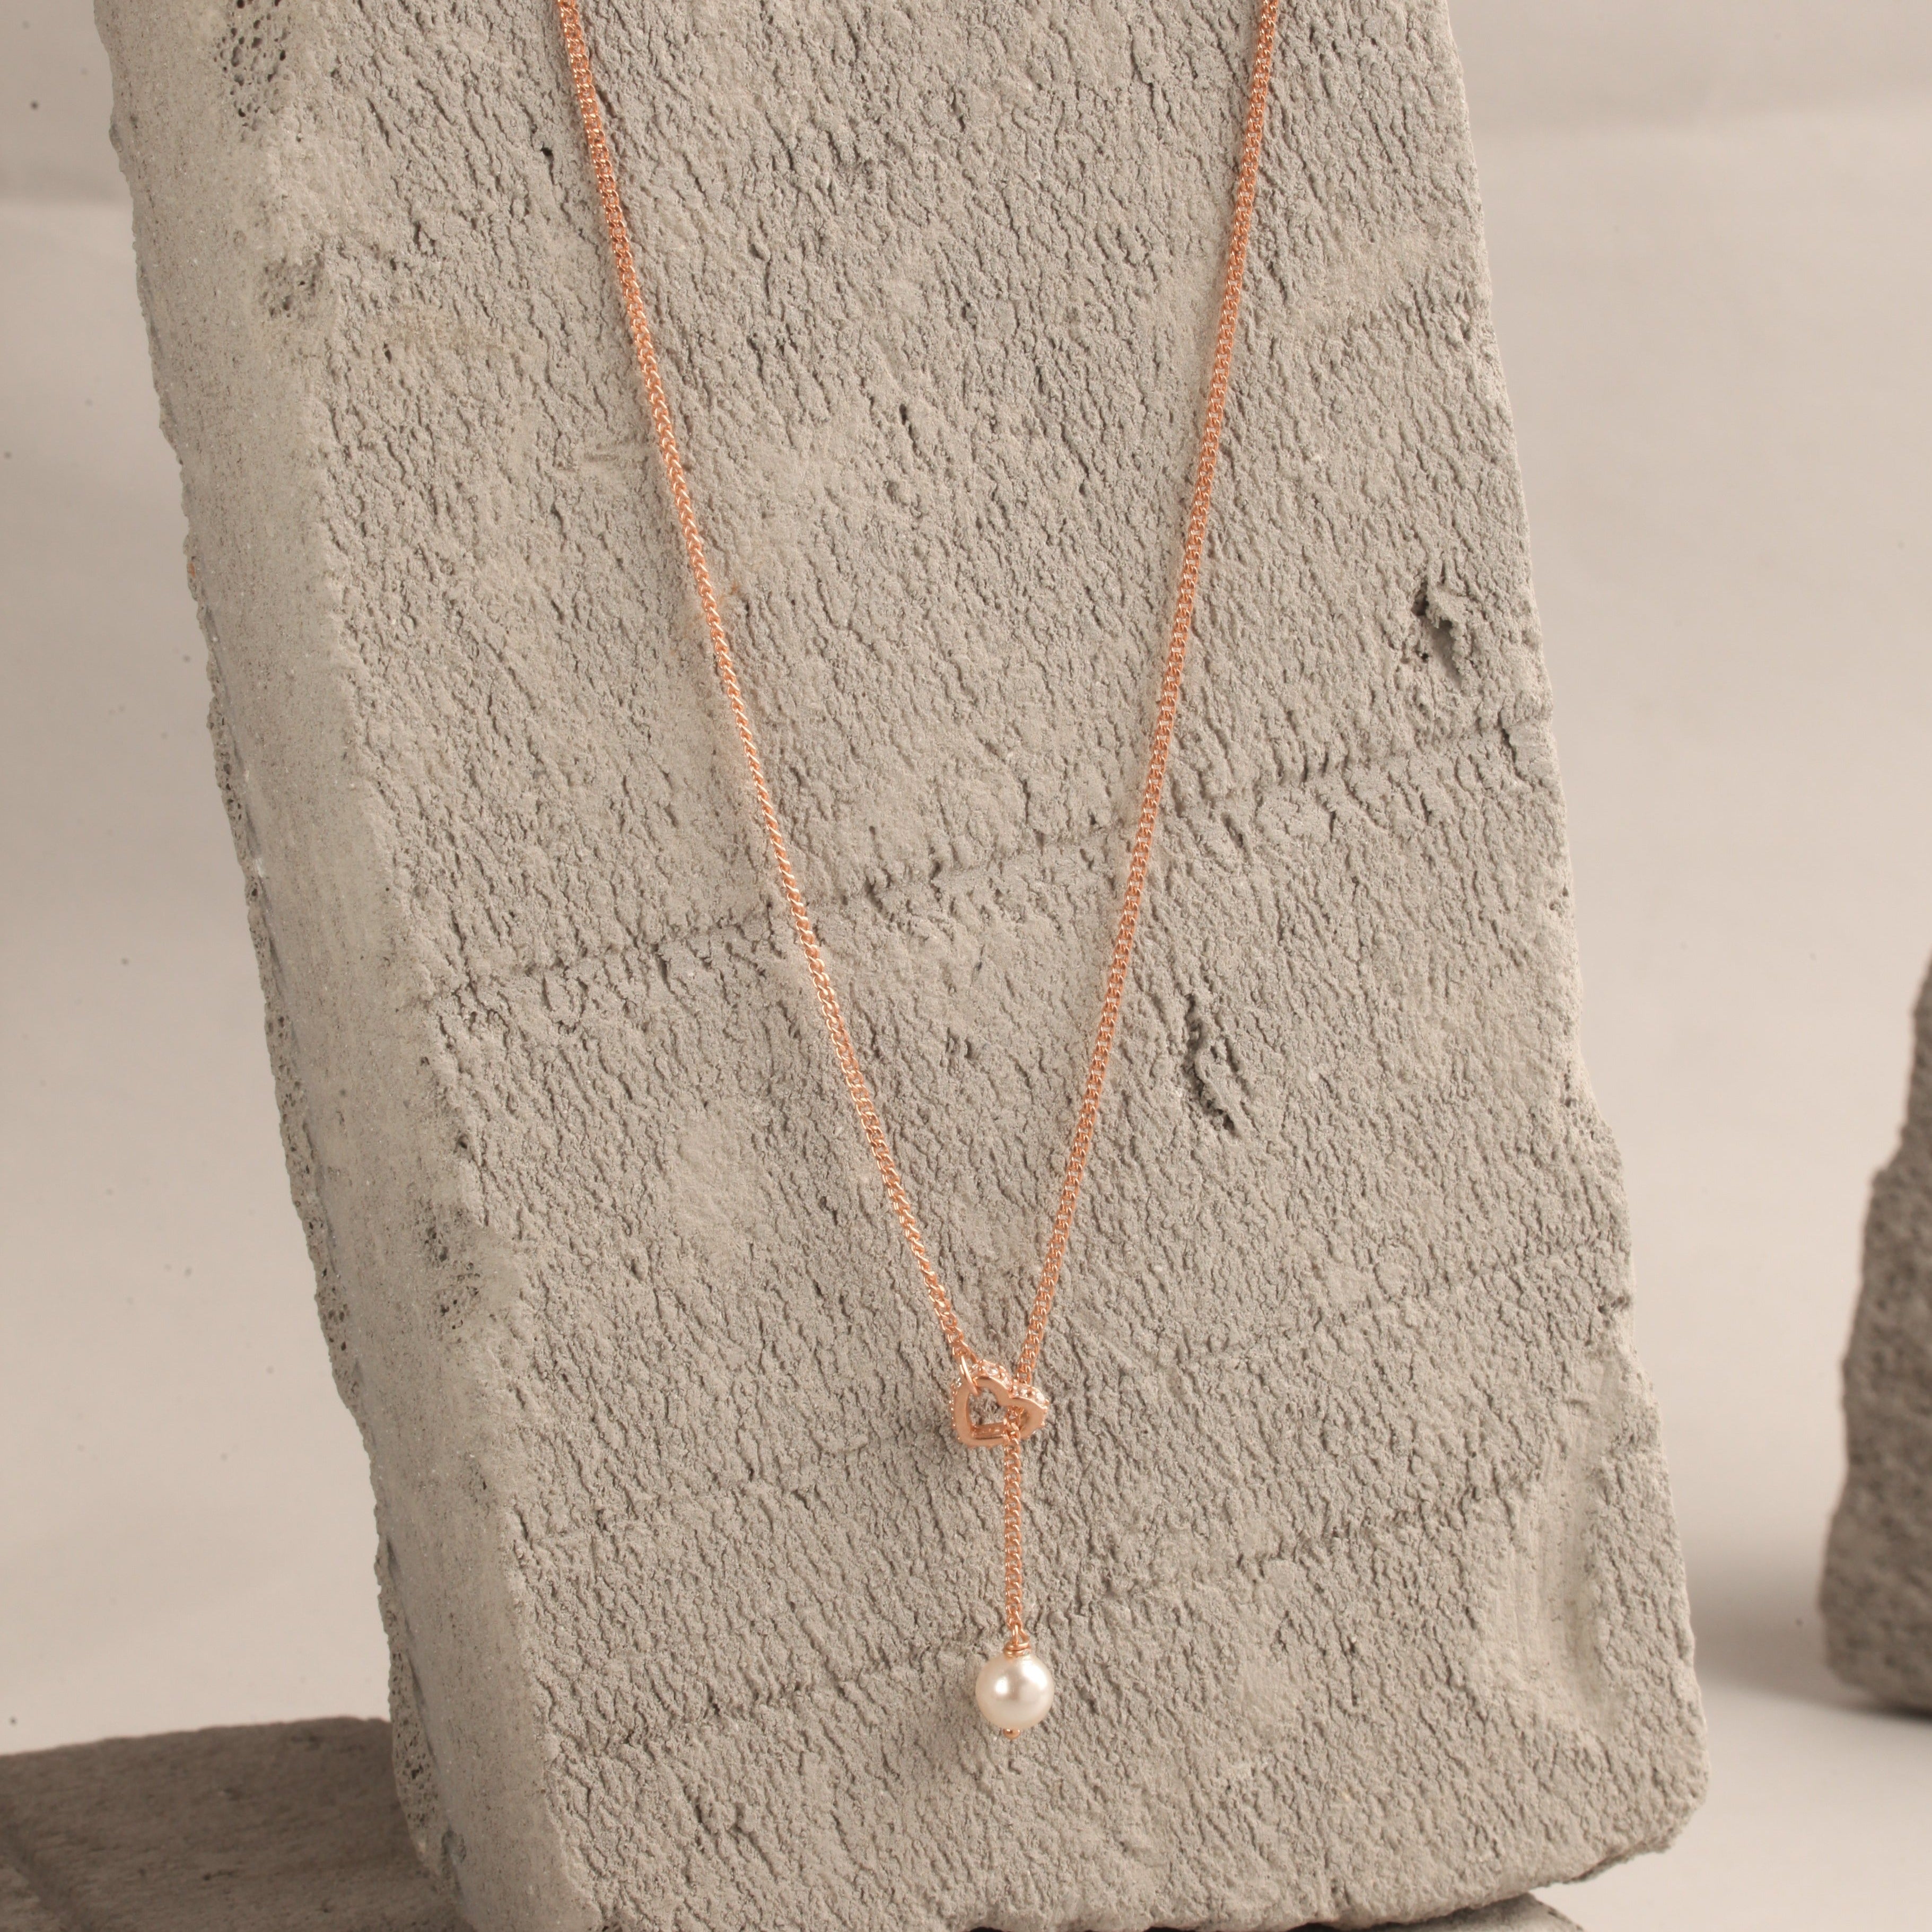 Blisse Allure Rose Gold Heart Pearl Lariat Necklace